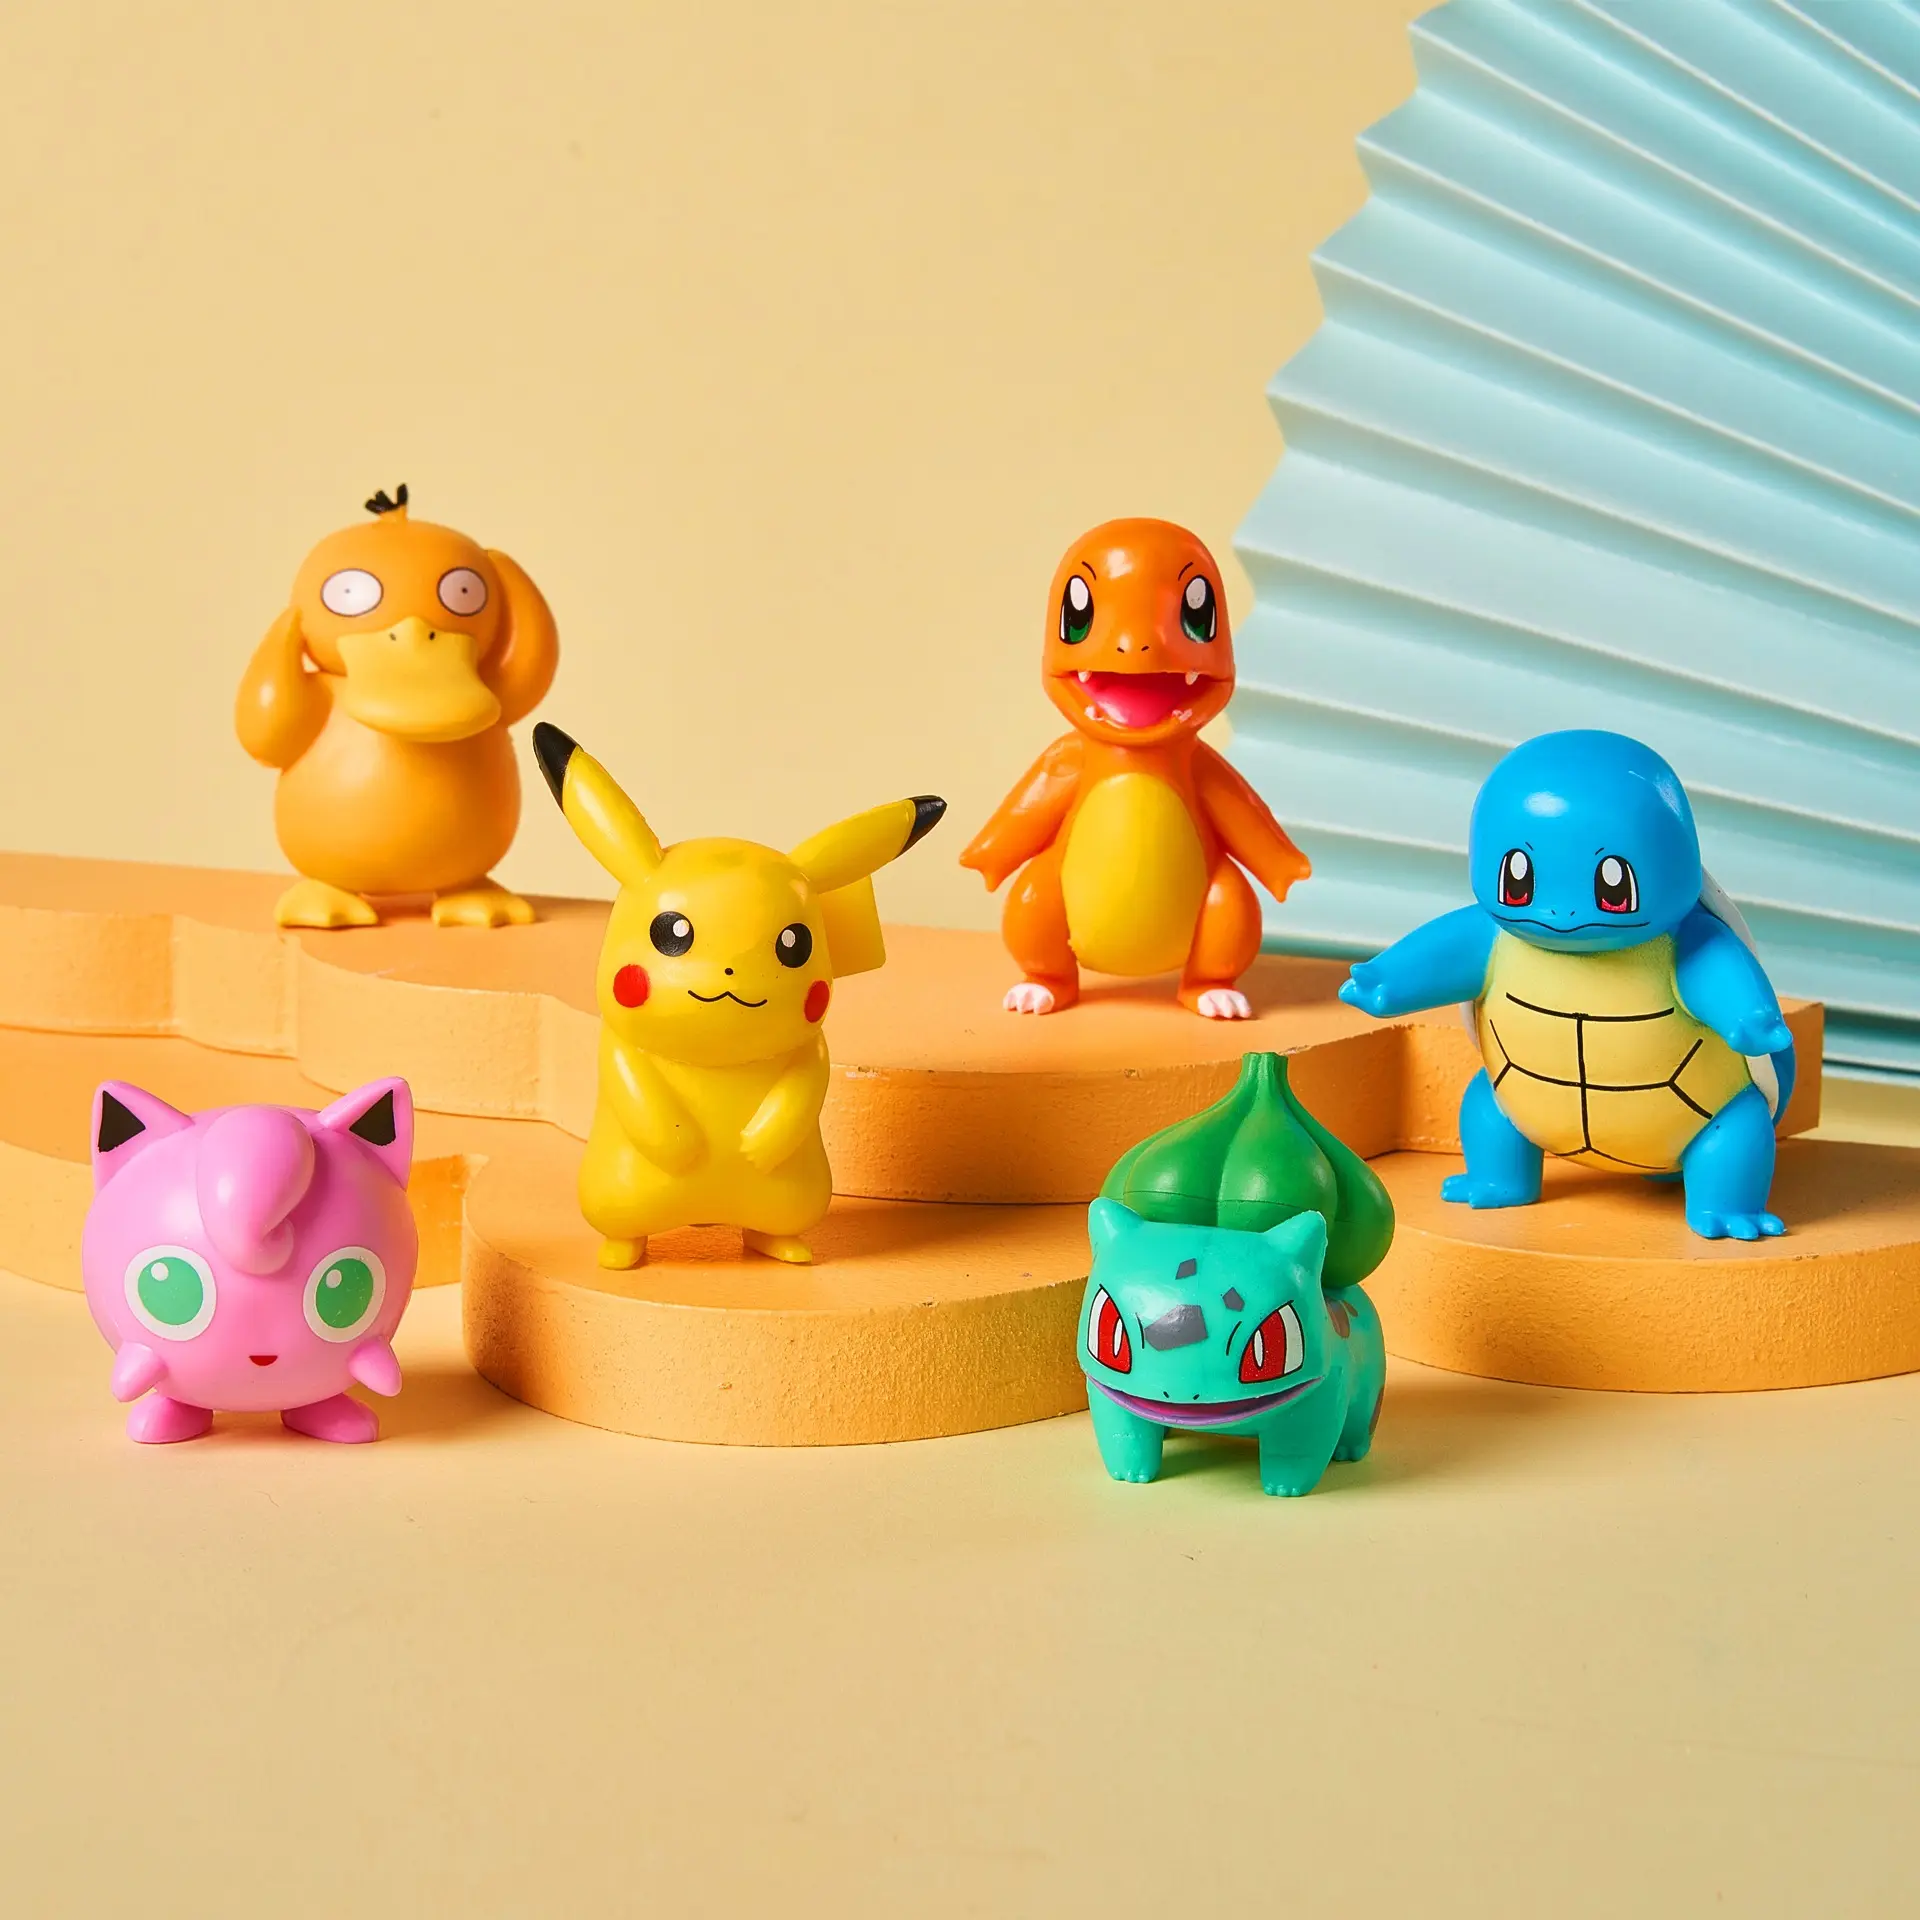 5-8cm 6 style anime blind box pokemoned figure PVC model toy for kids gifts